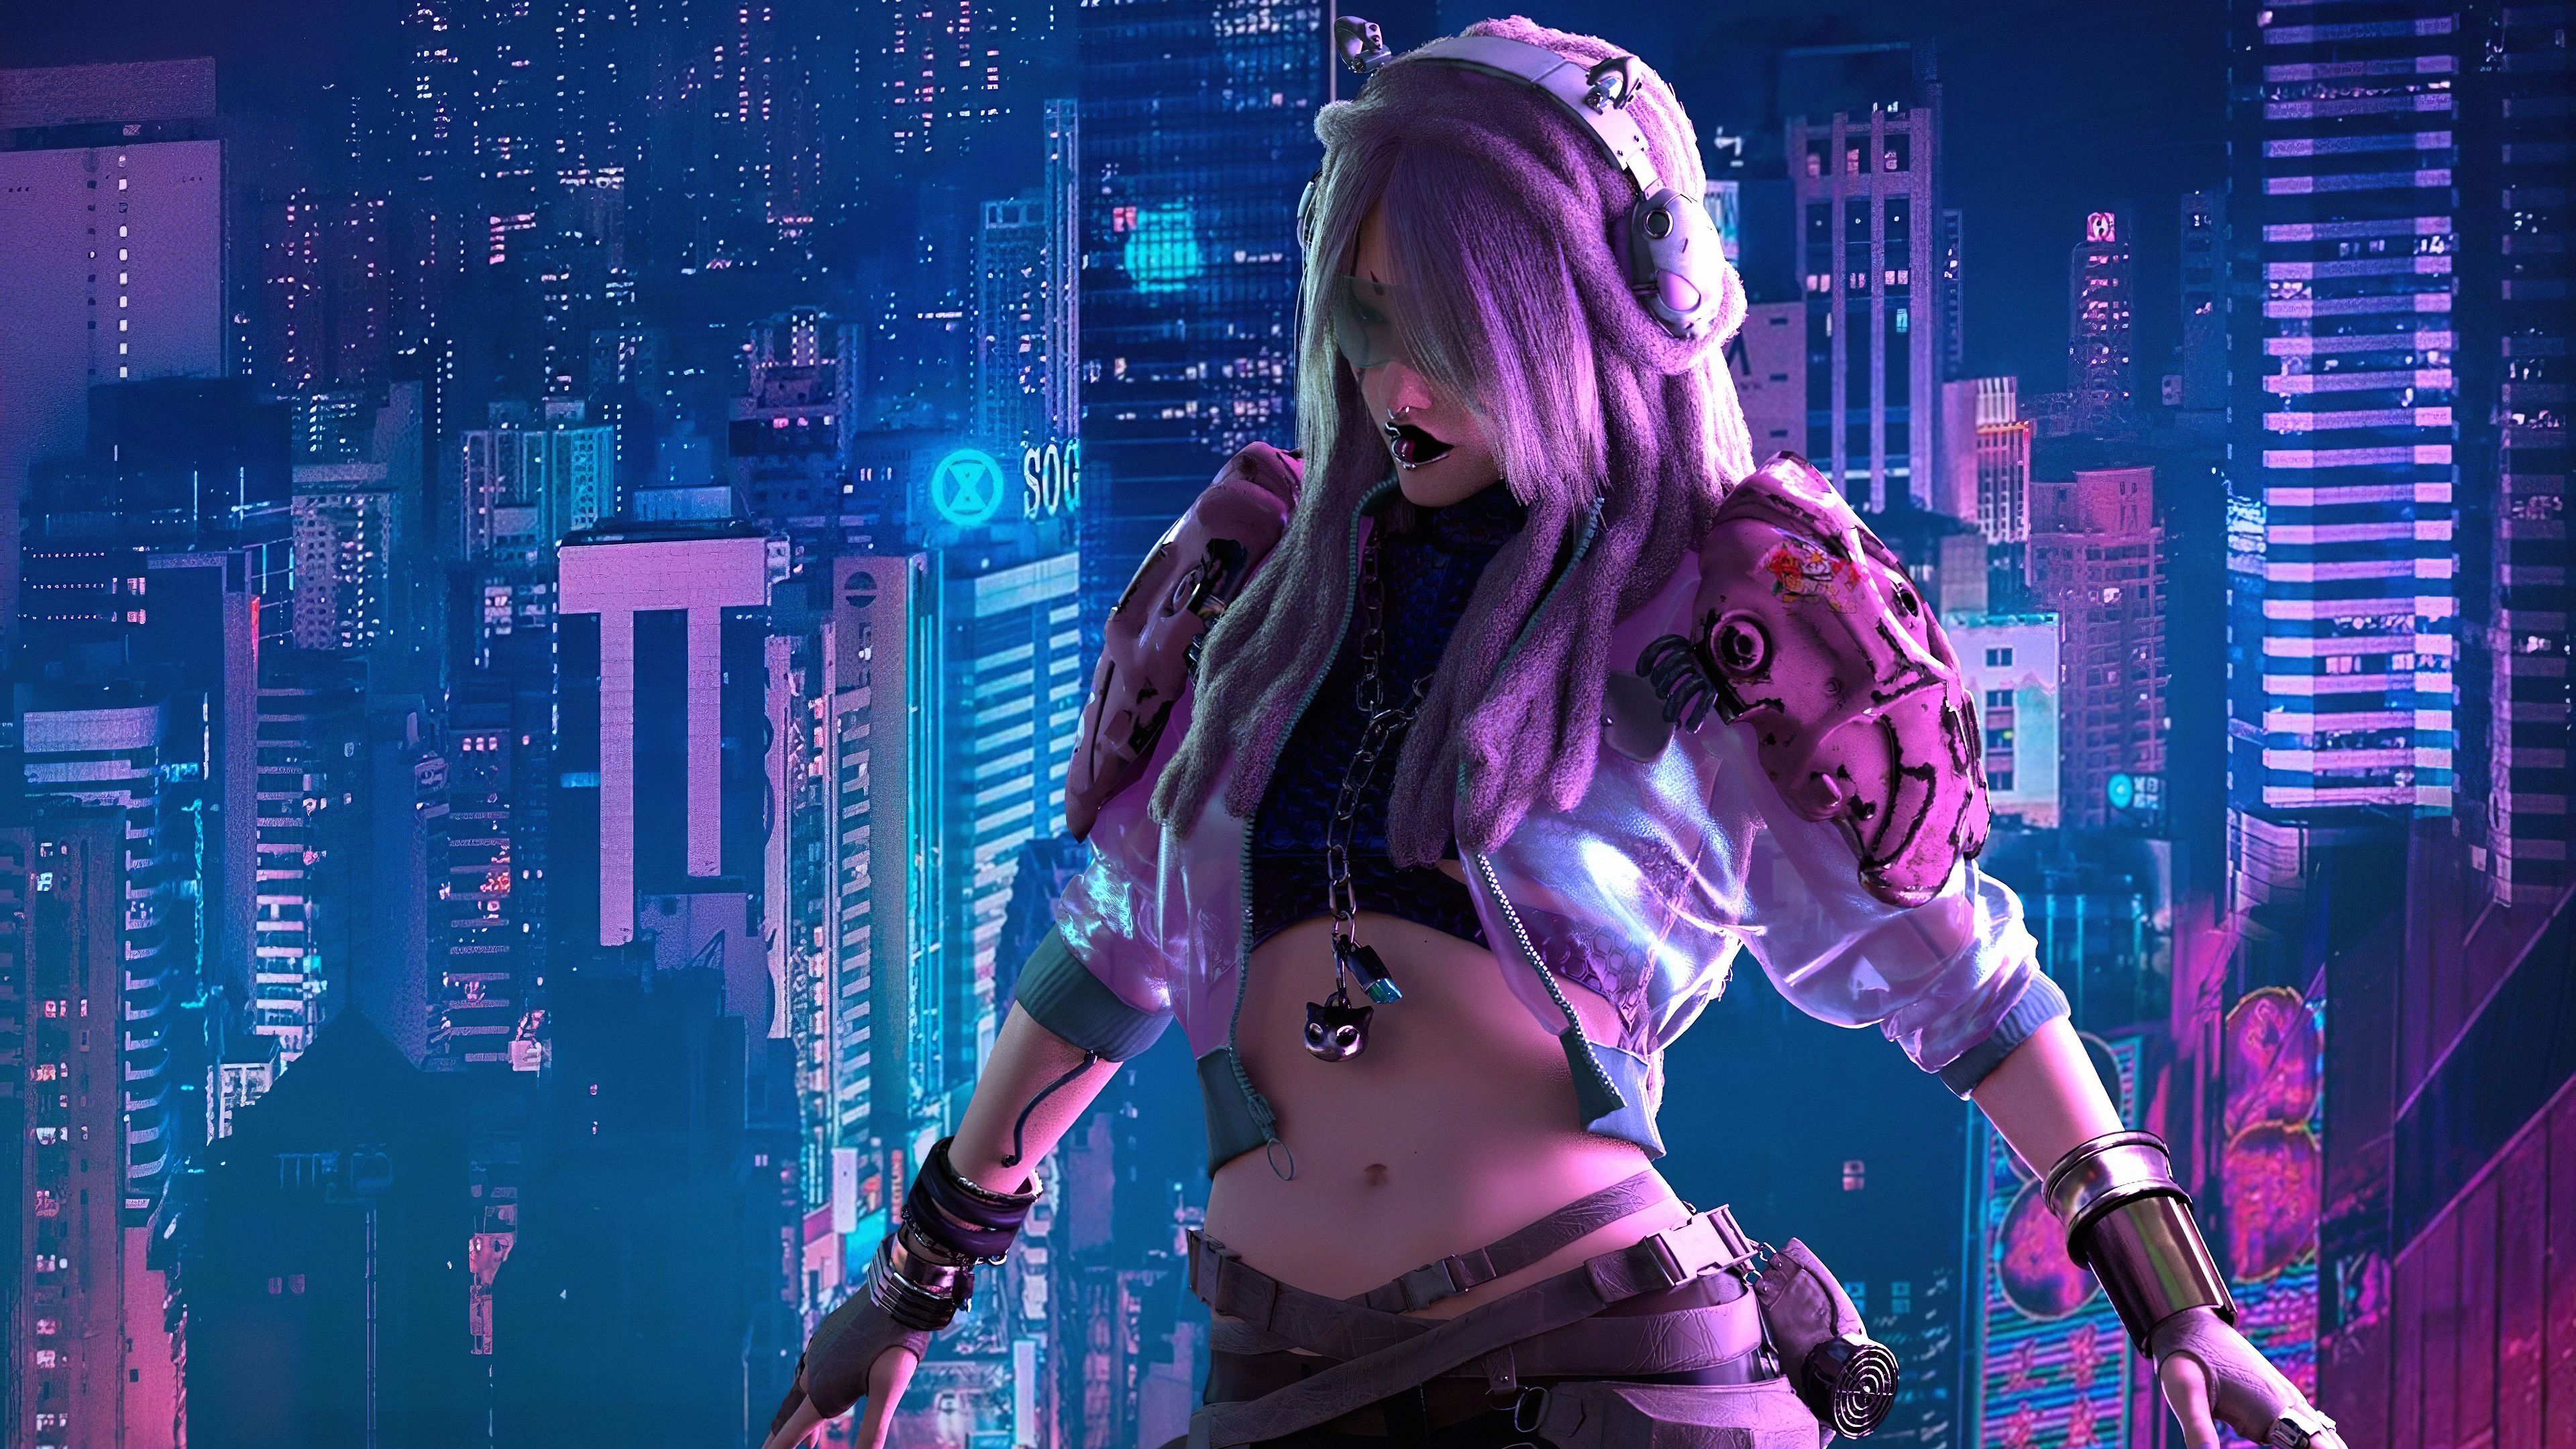 Cyberpunk City Girl 4k, HD Artist, 4k Wallpaper, Image, Background, Photo and Picture